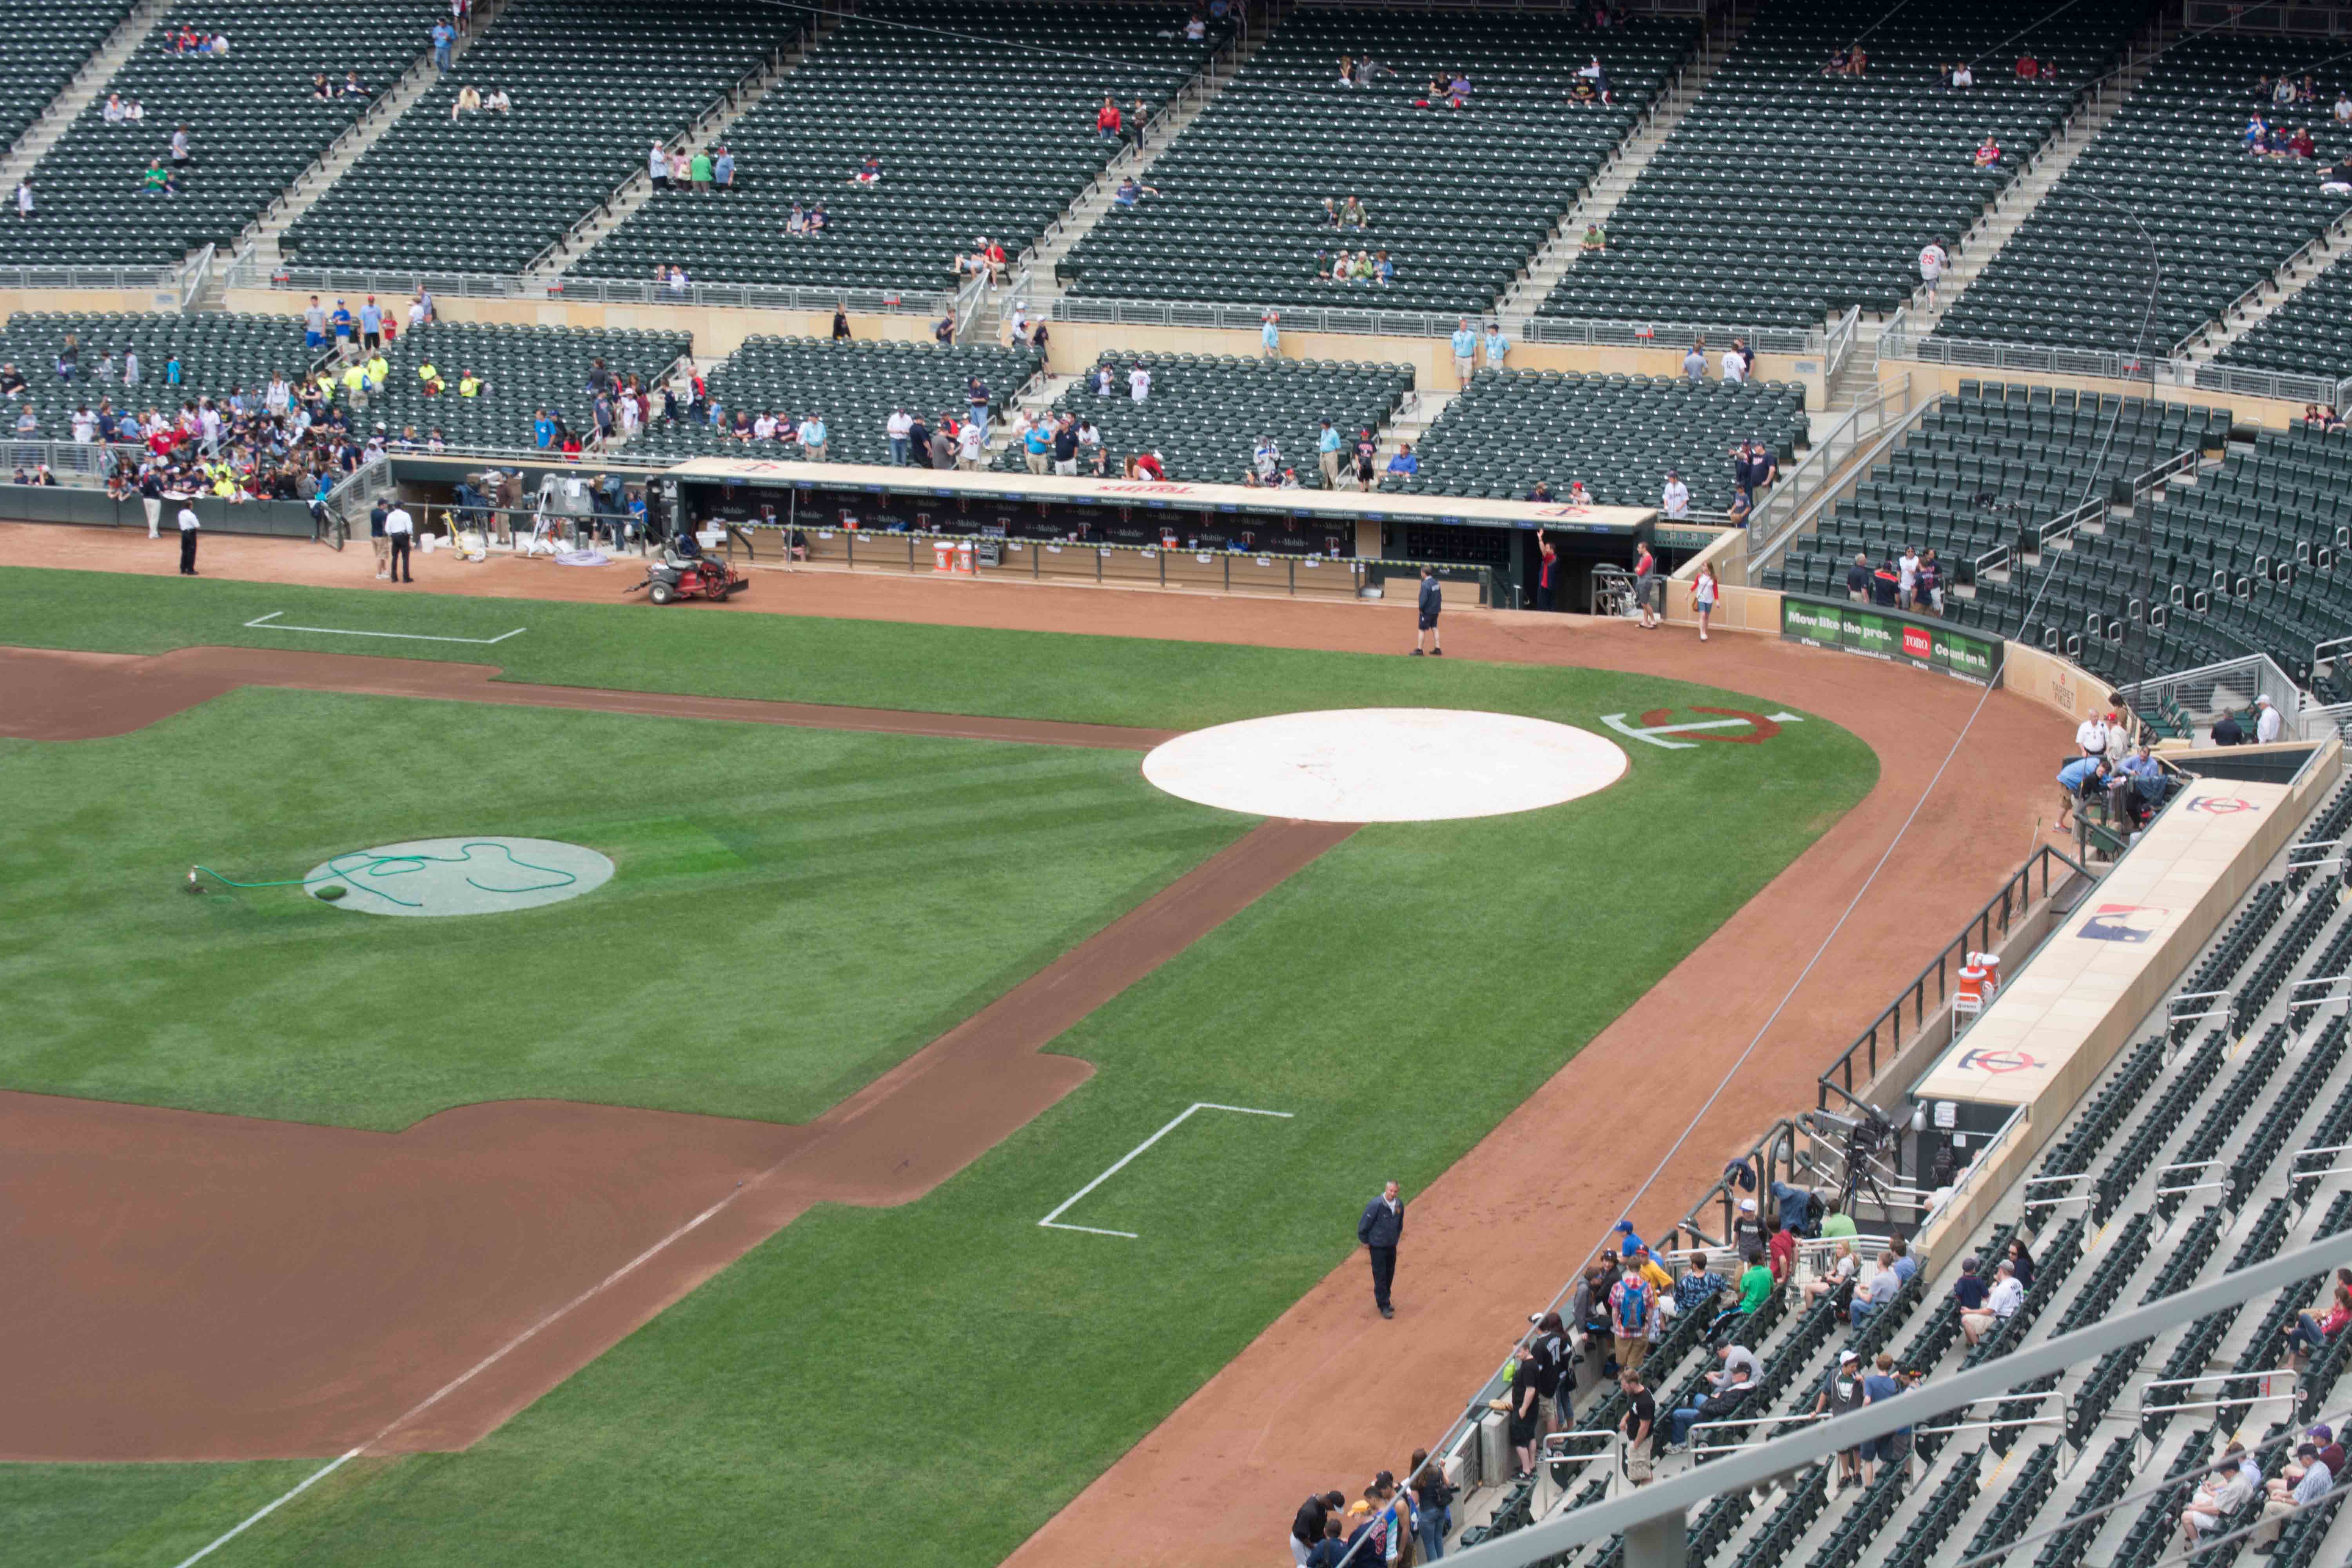 Shaded Seats at Target Field - Find Twins Tickets in the Shade